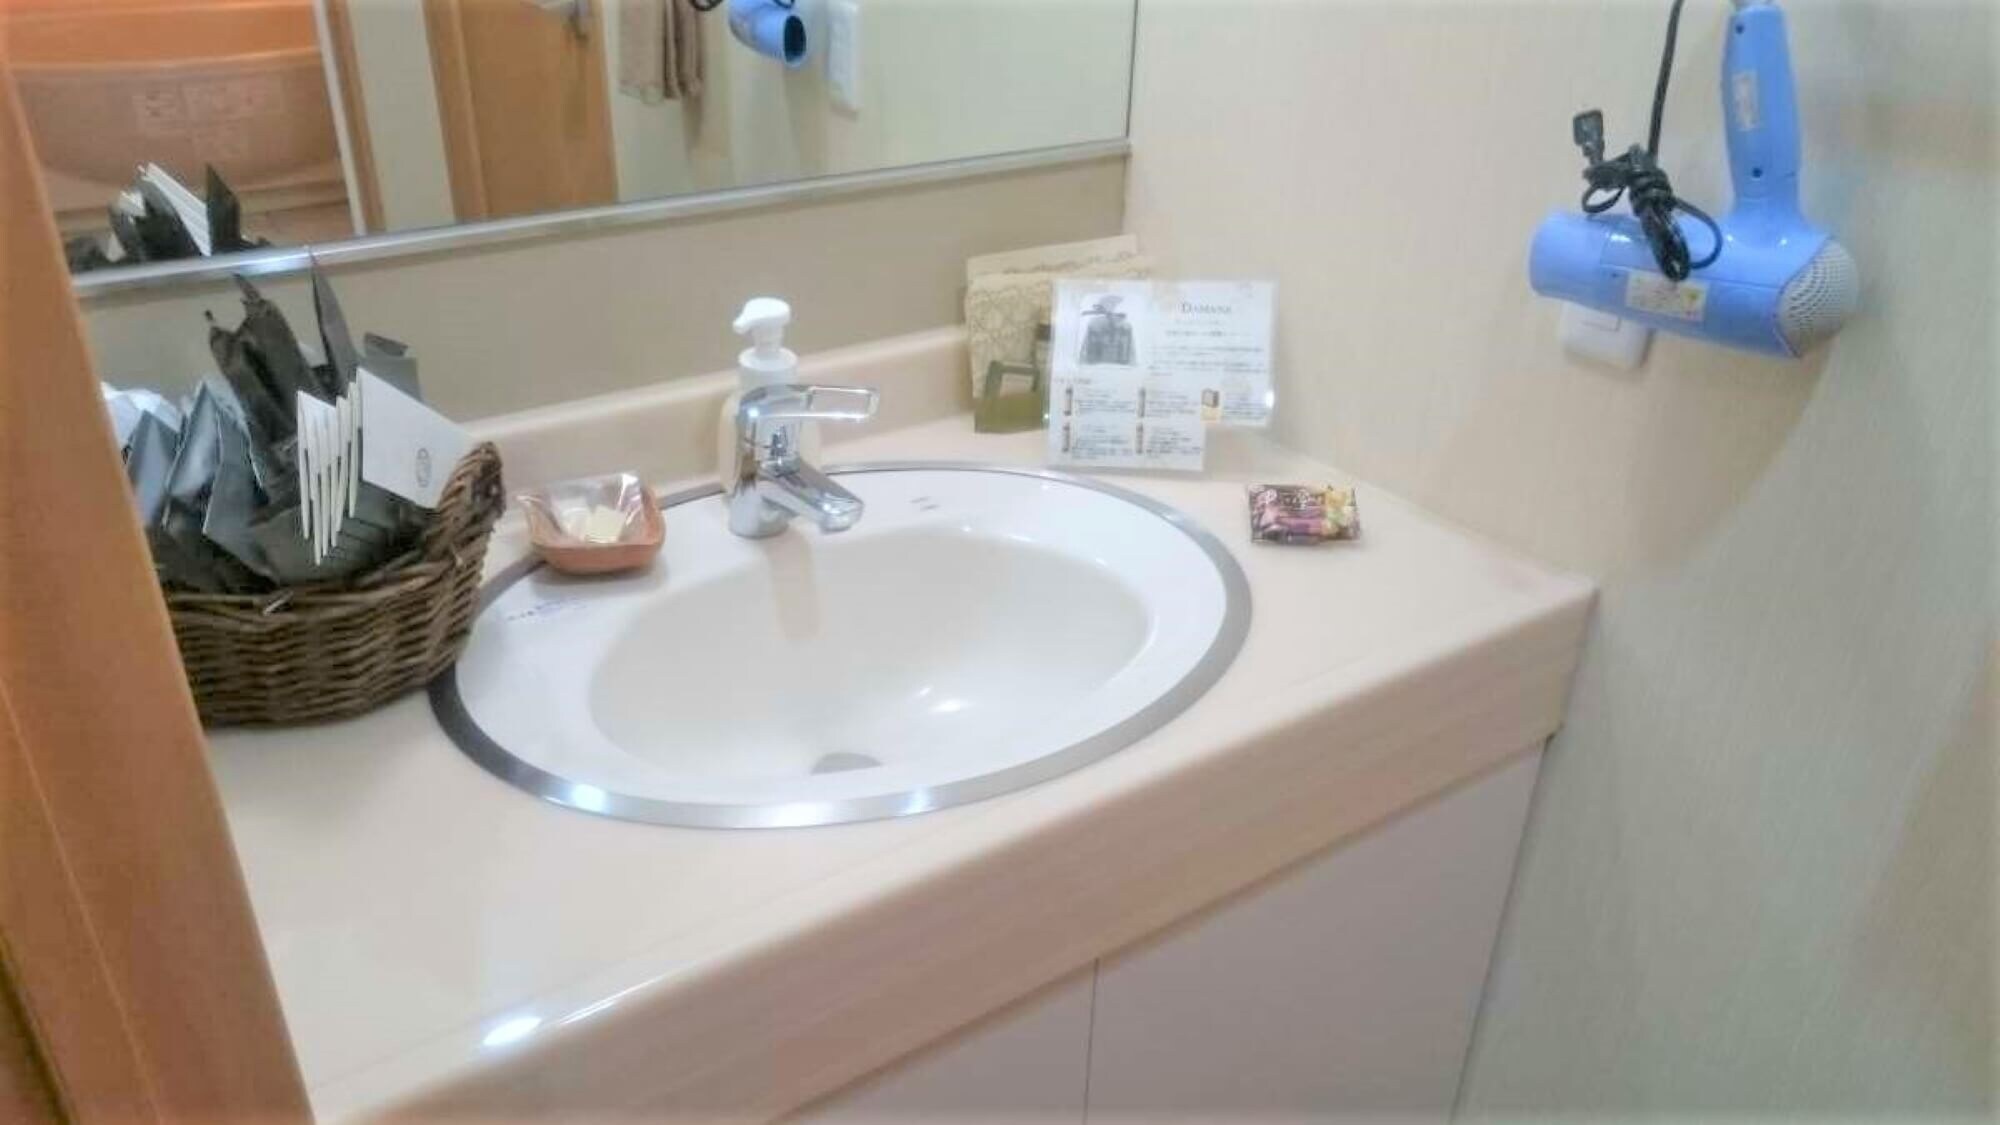 ■ Japanese and Western rooms 36 sqm / 50 sqm bath toilet